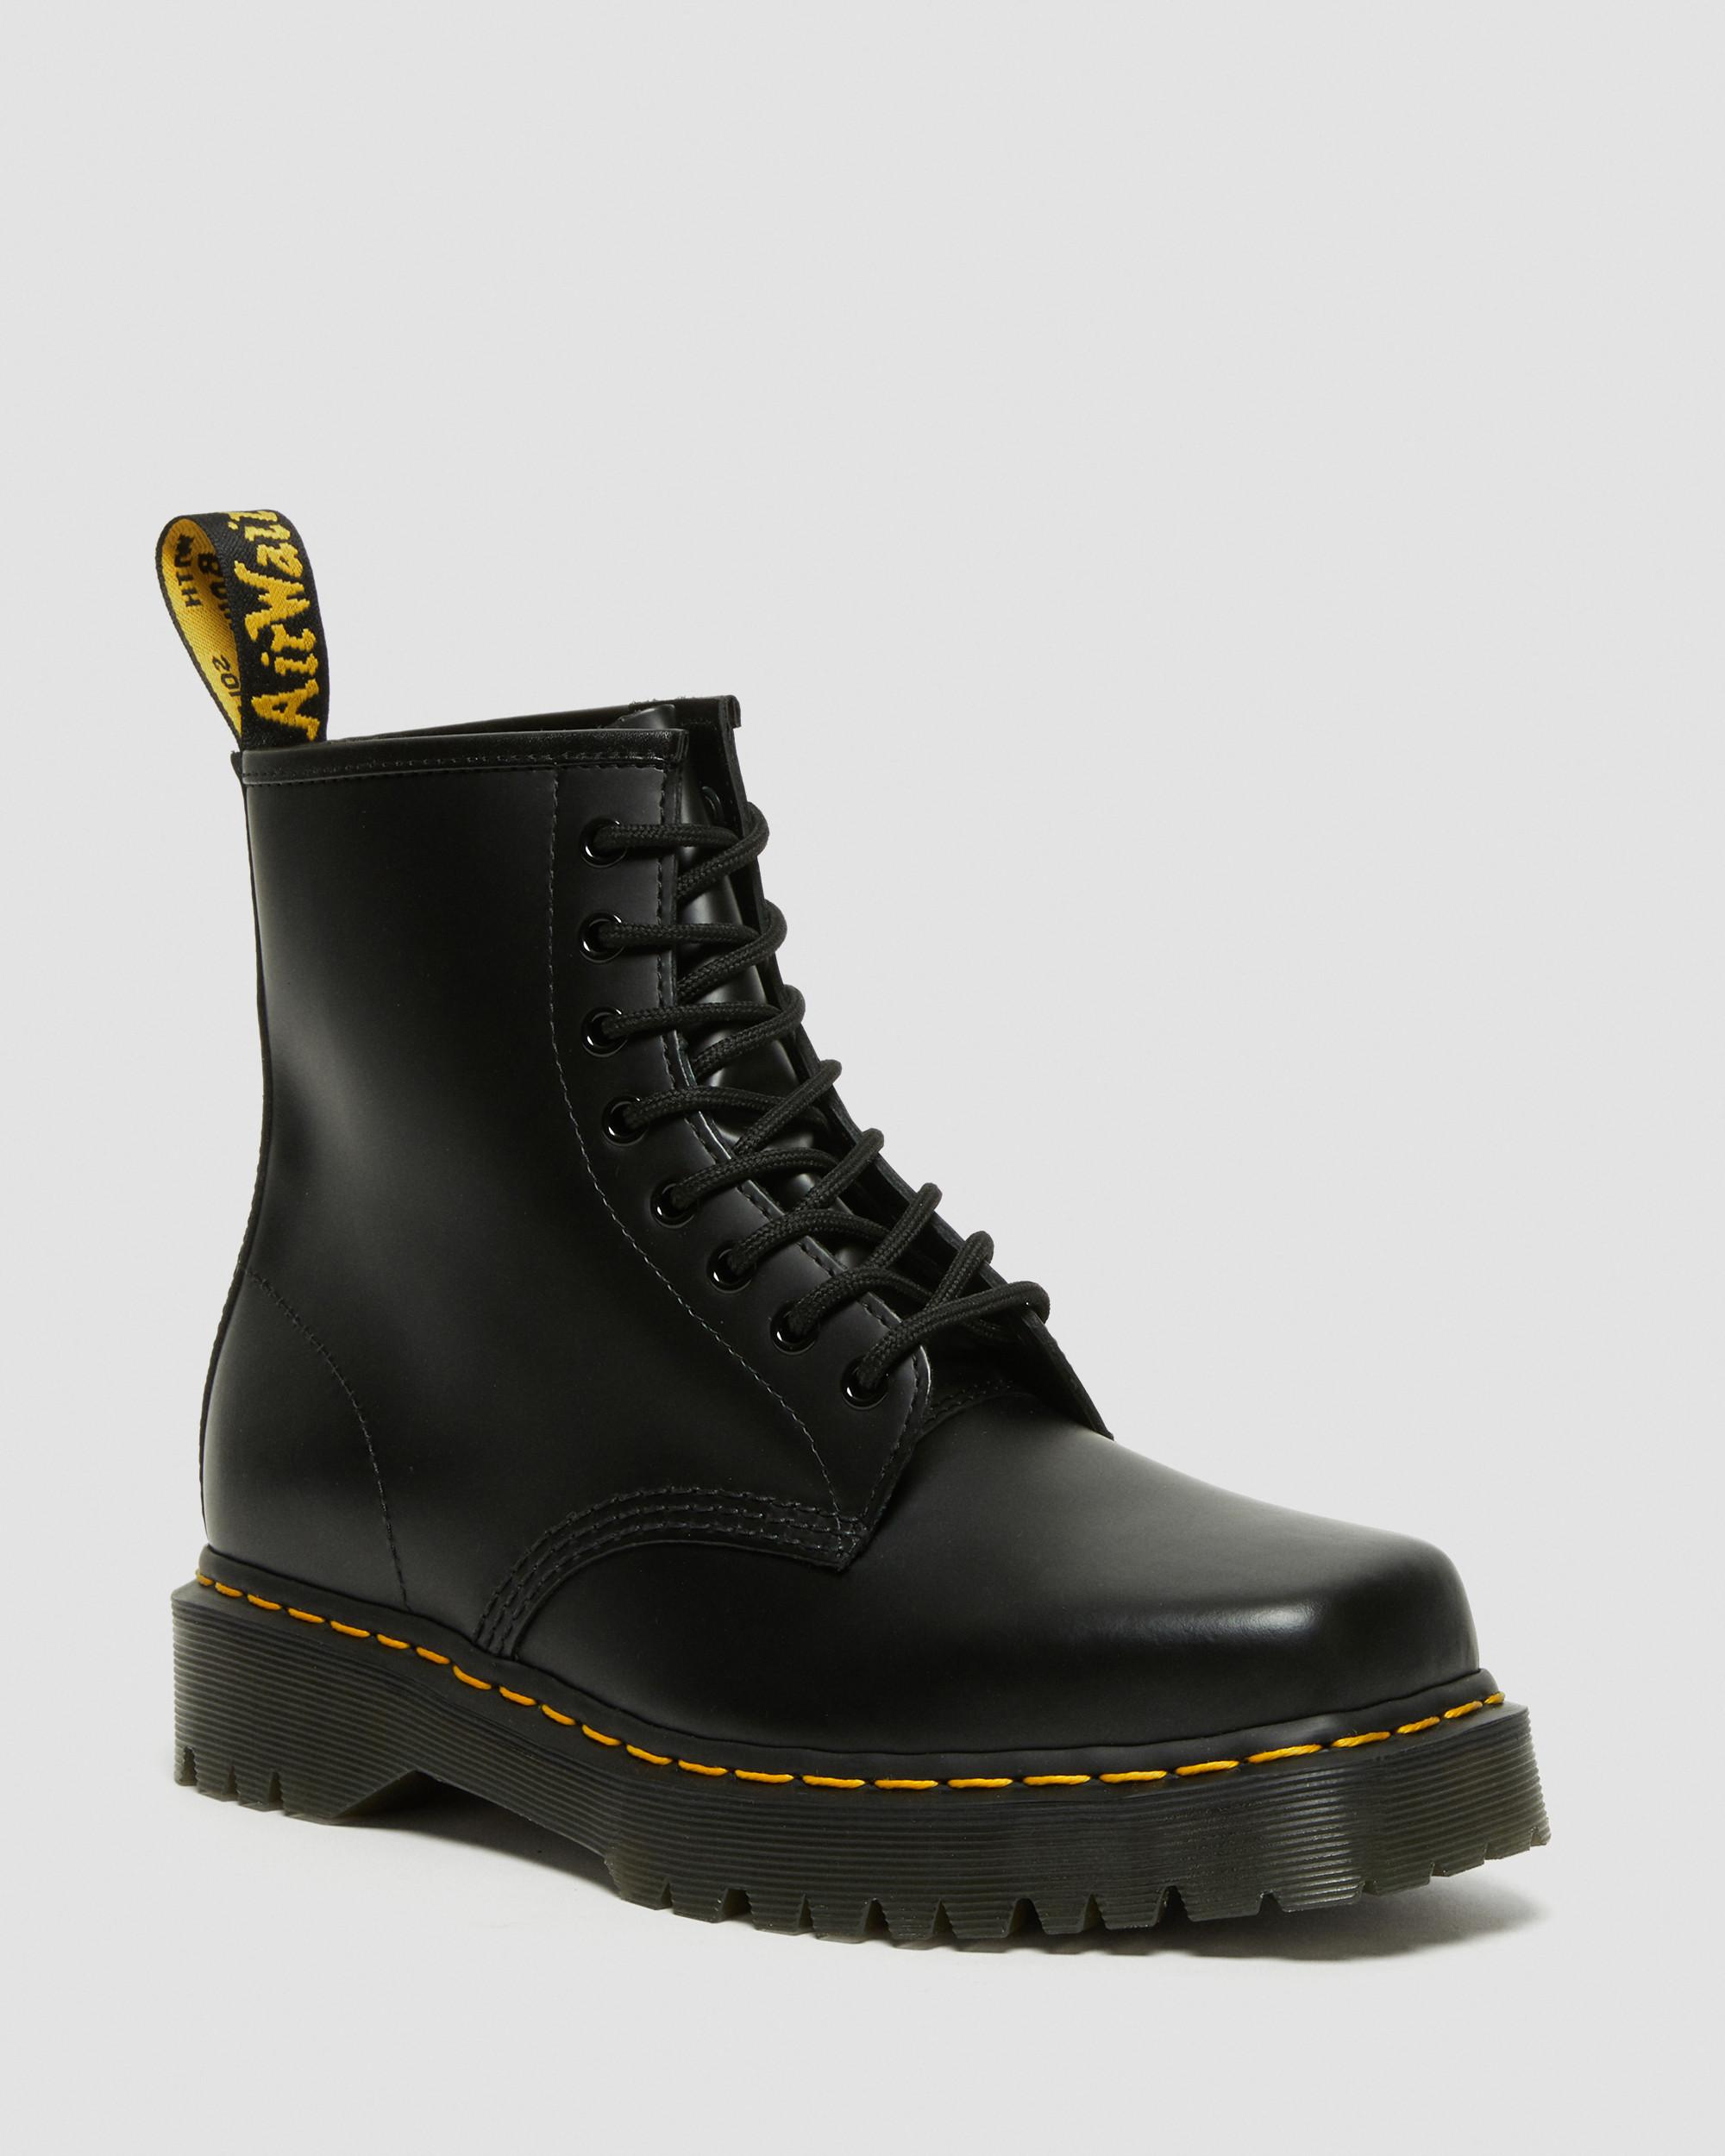 1460 Bex Squared Toe Leather Lace Up Boots in Black | Dr. Martens